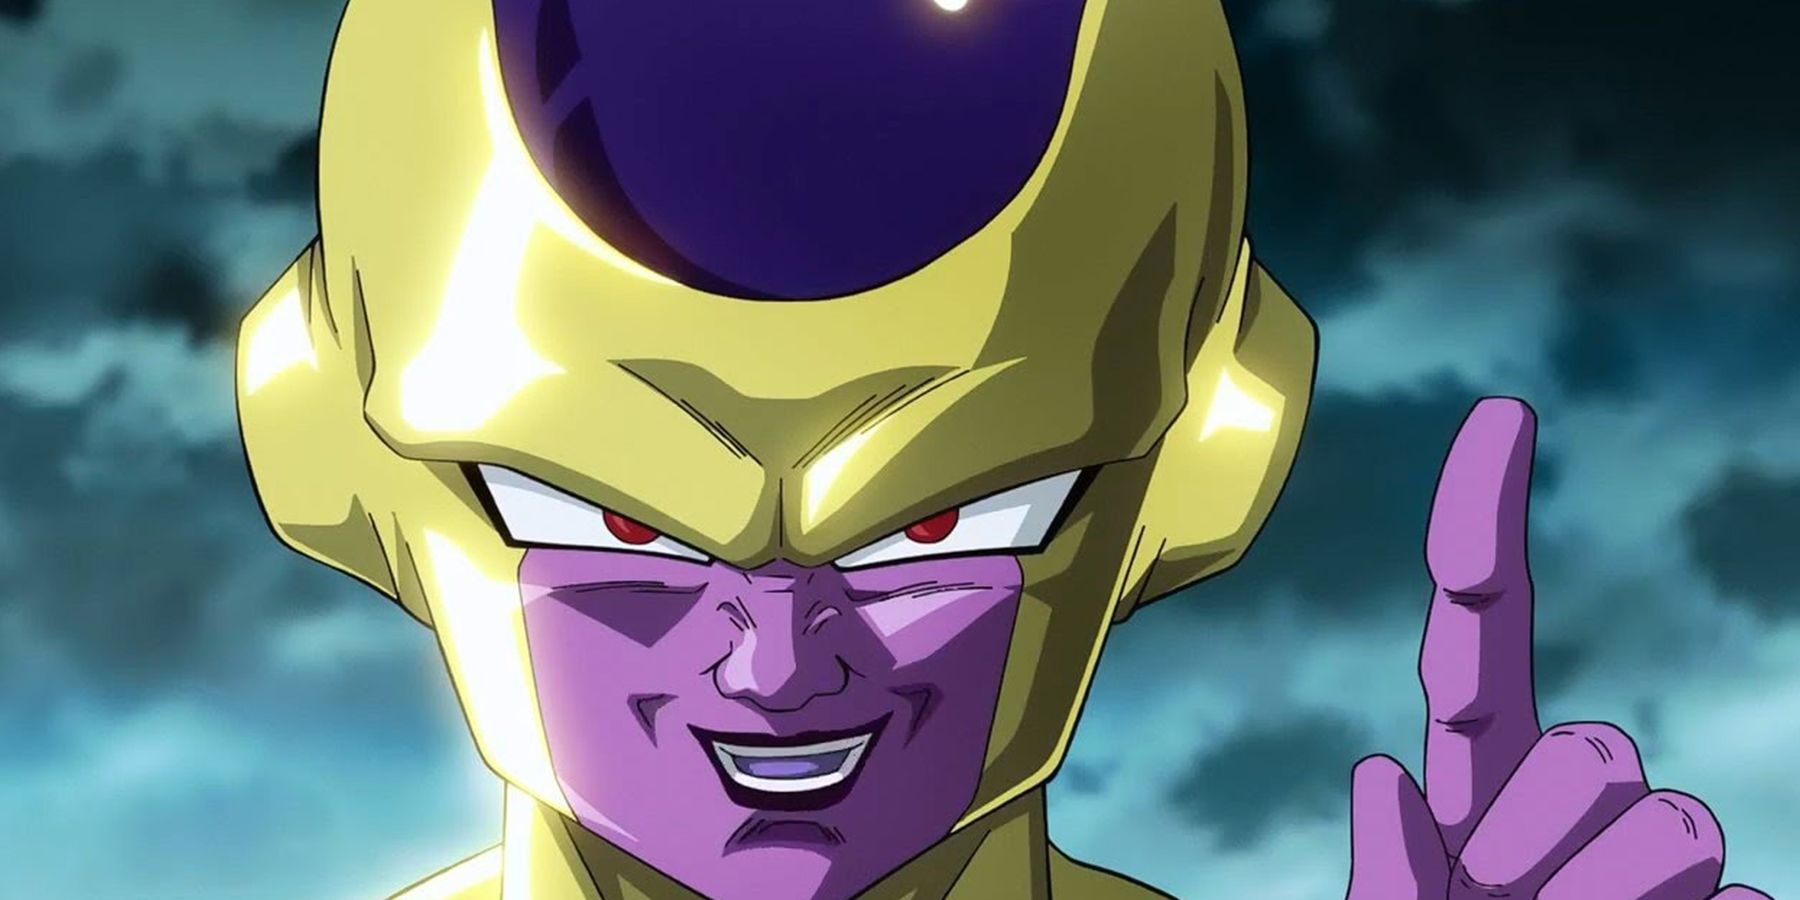 Final Form The 25 Strongest Anime Villain Transformations Of All Time  Ranked 